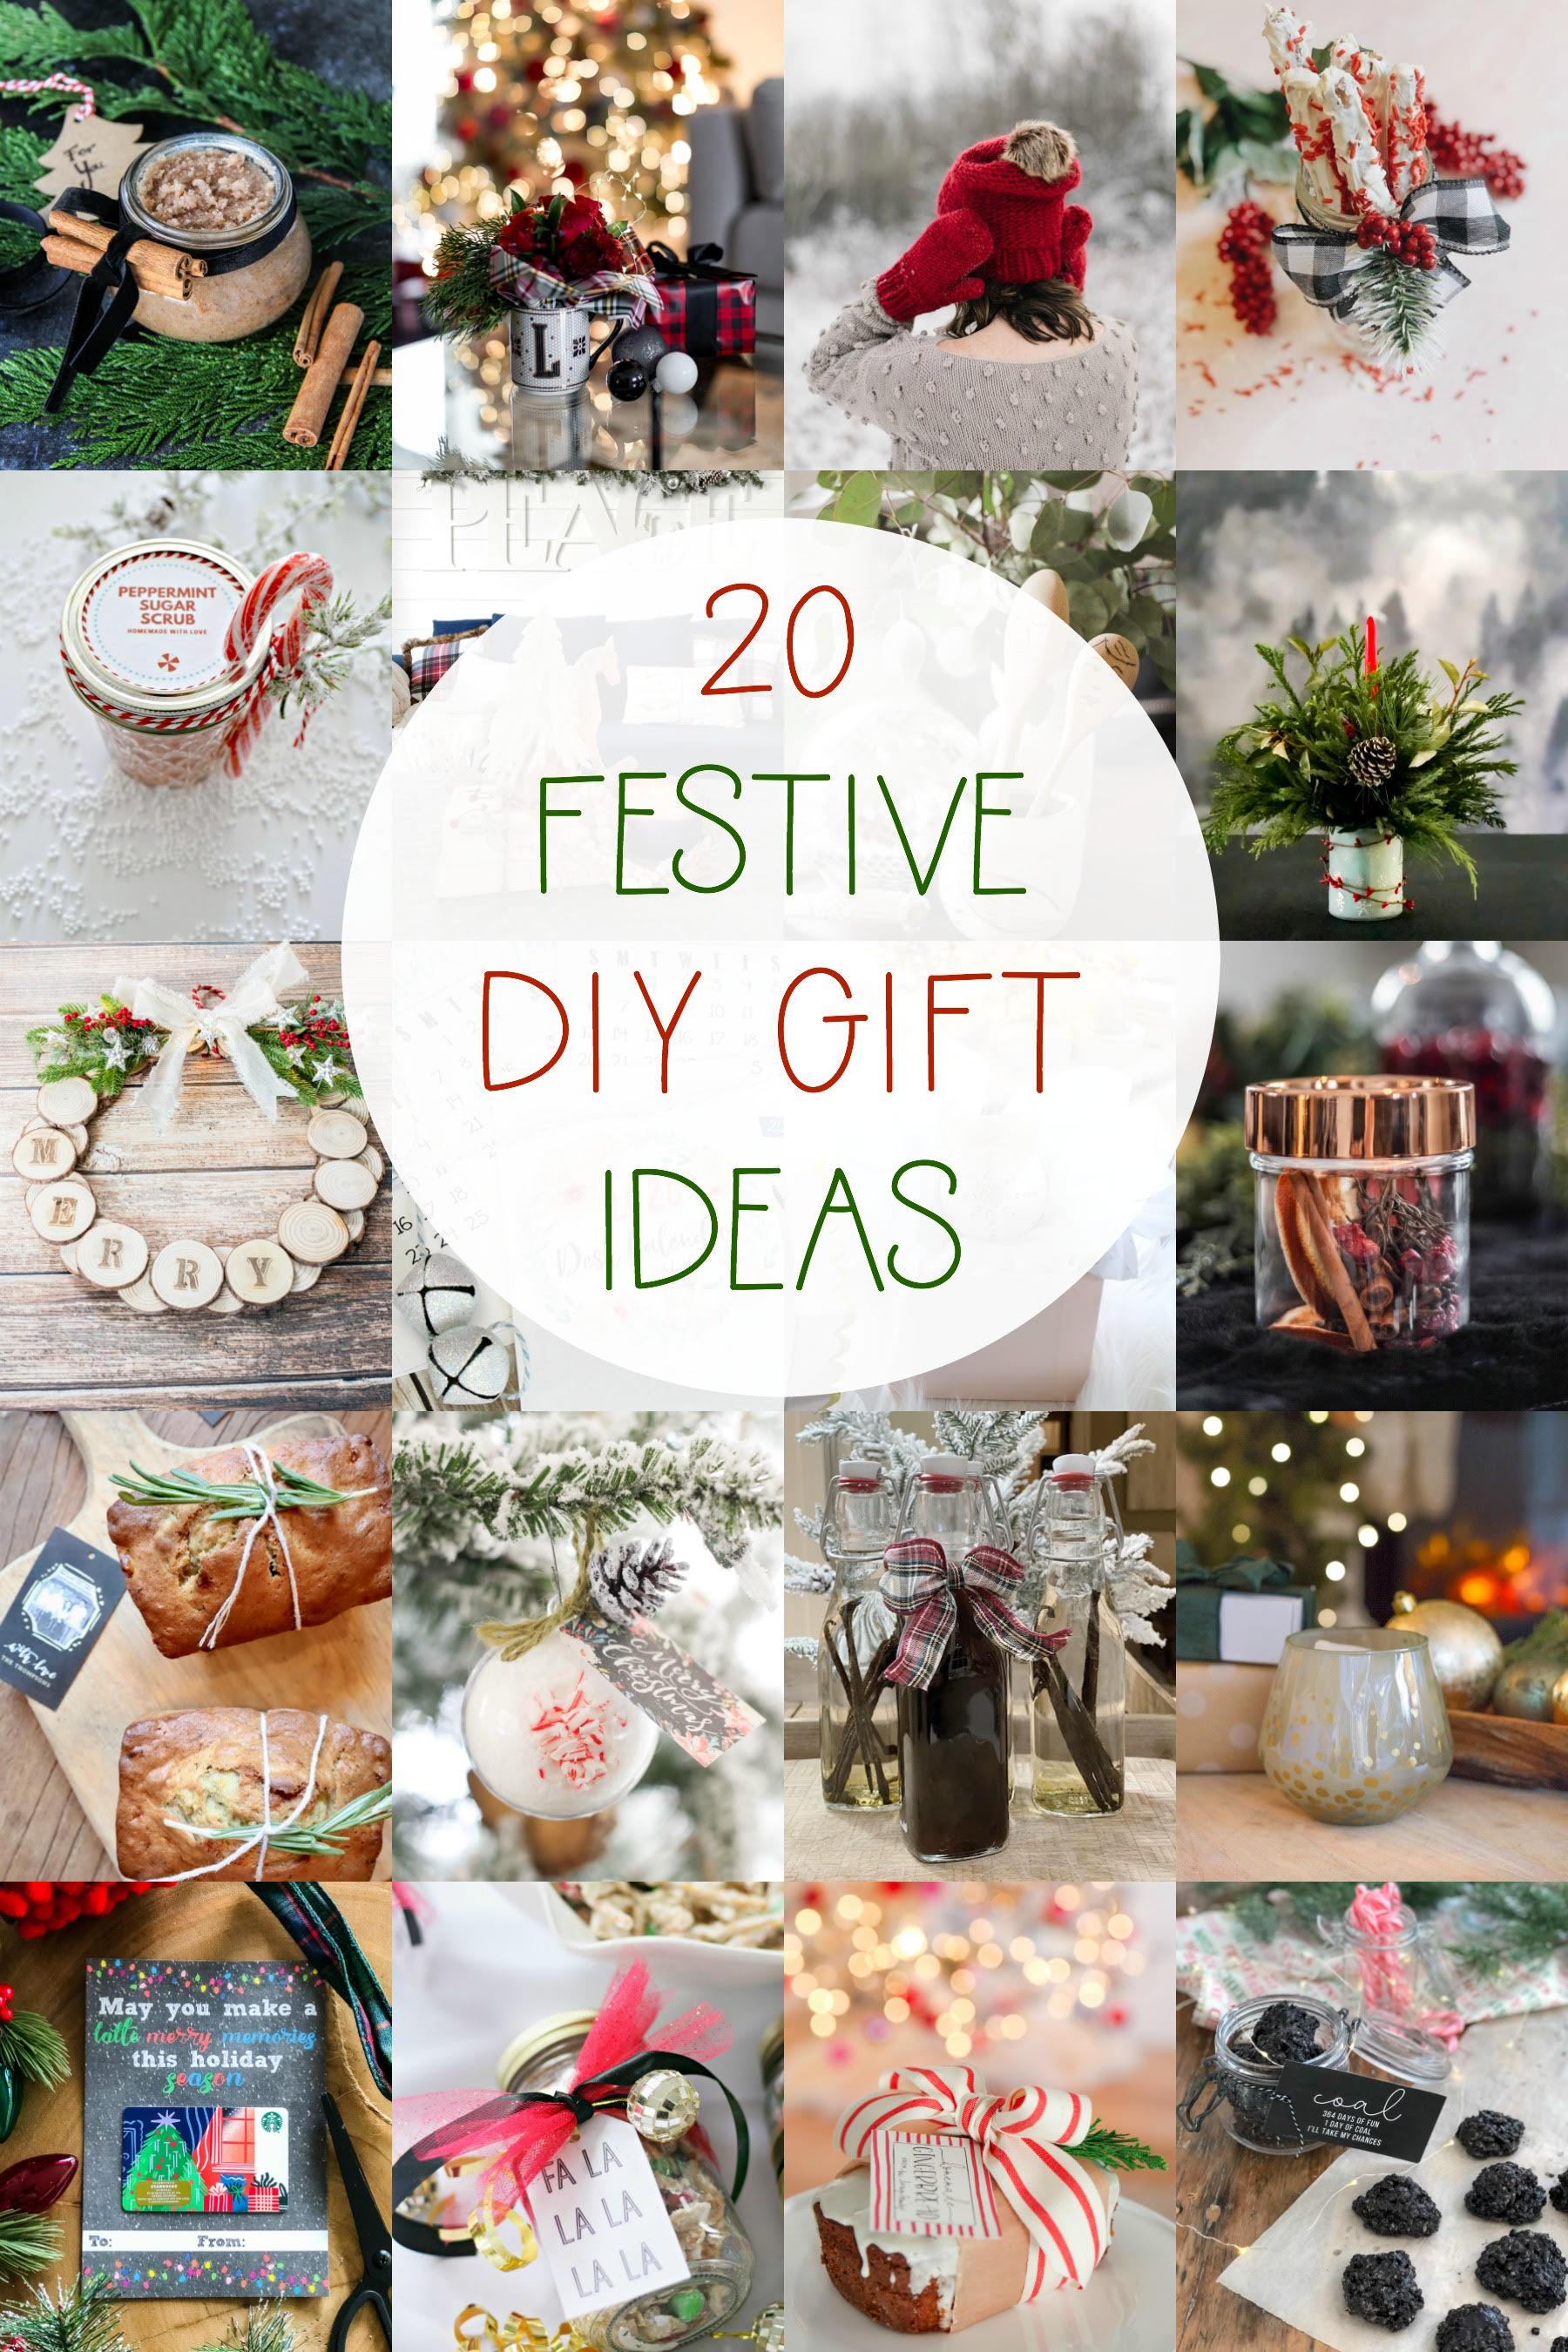 20 Easy Christmas DIY gift ideas for the Holiday Season – This is our